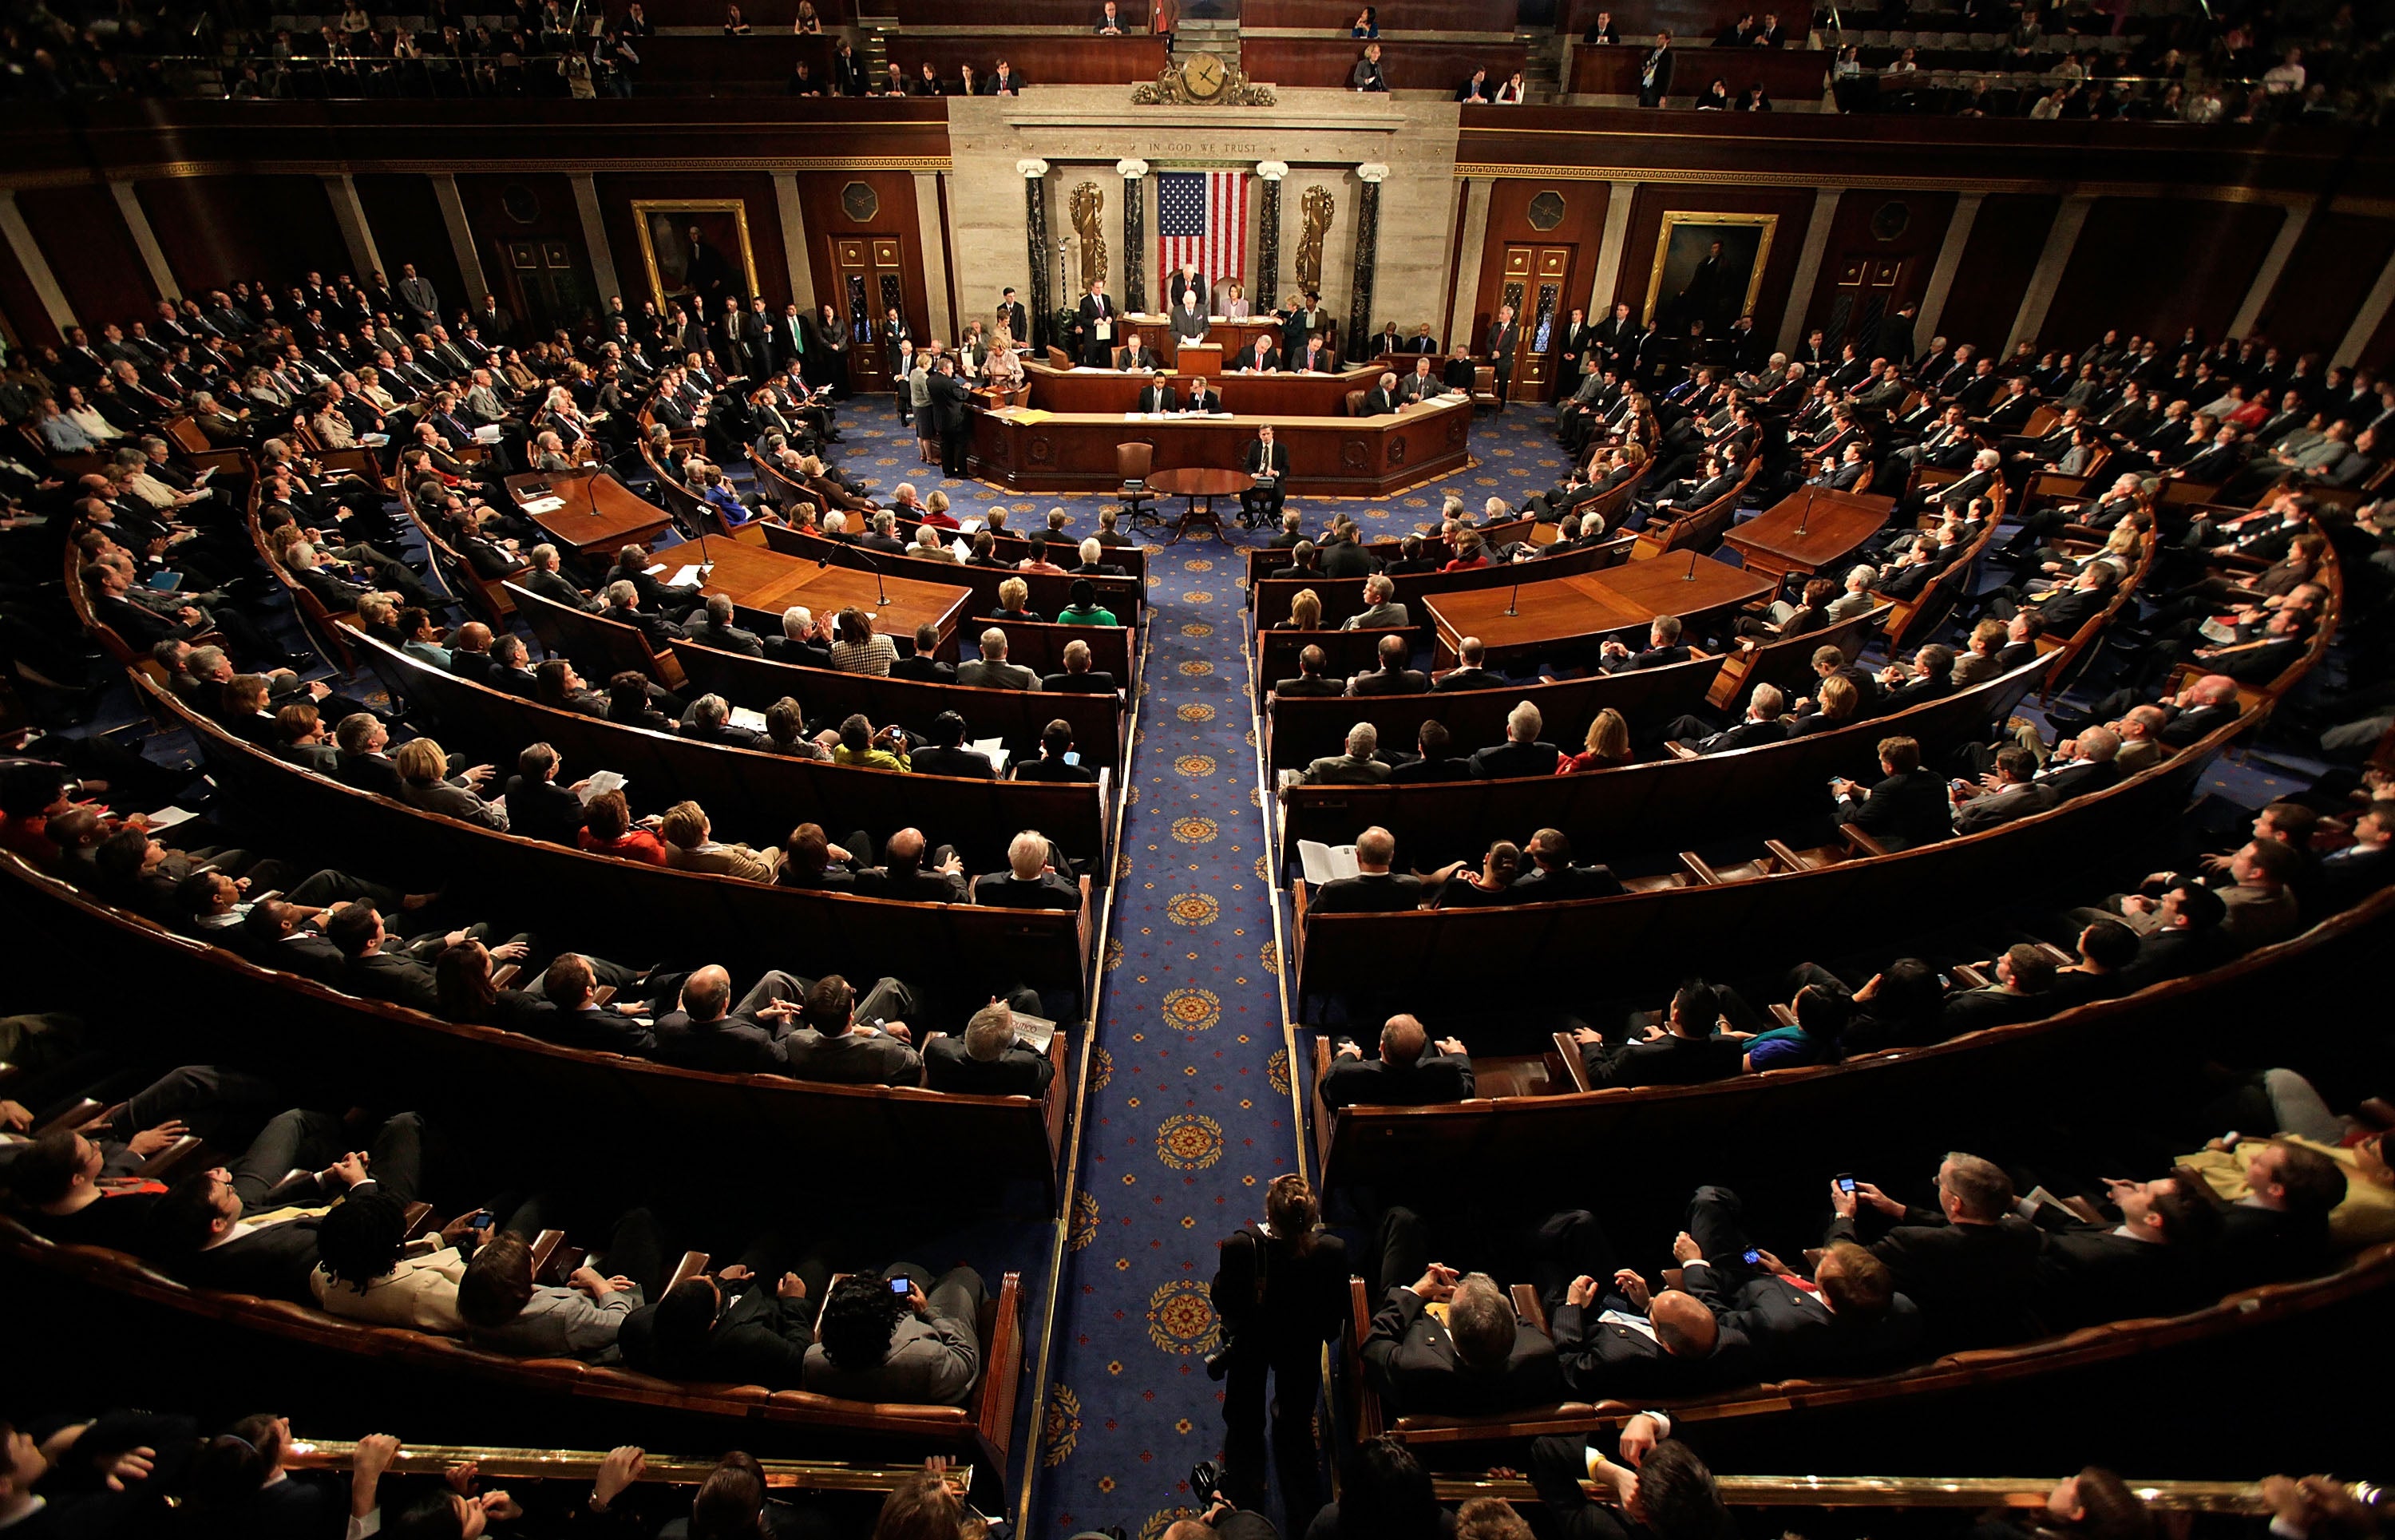 A joint session of Congress meets to count the Electoral College vote from the 2008 presidential election